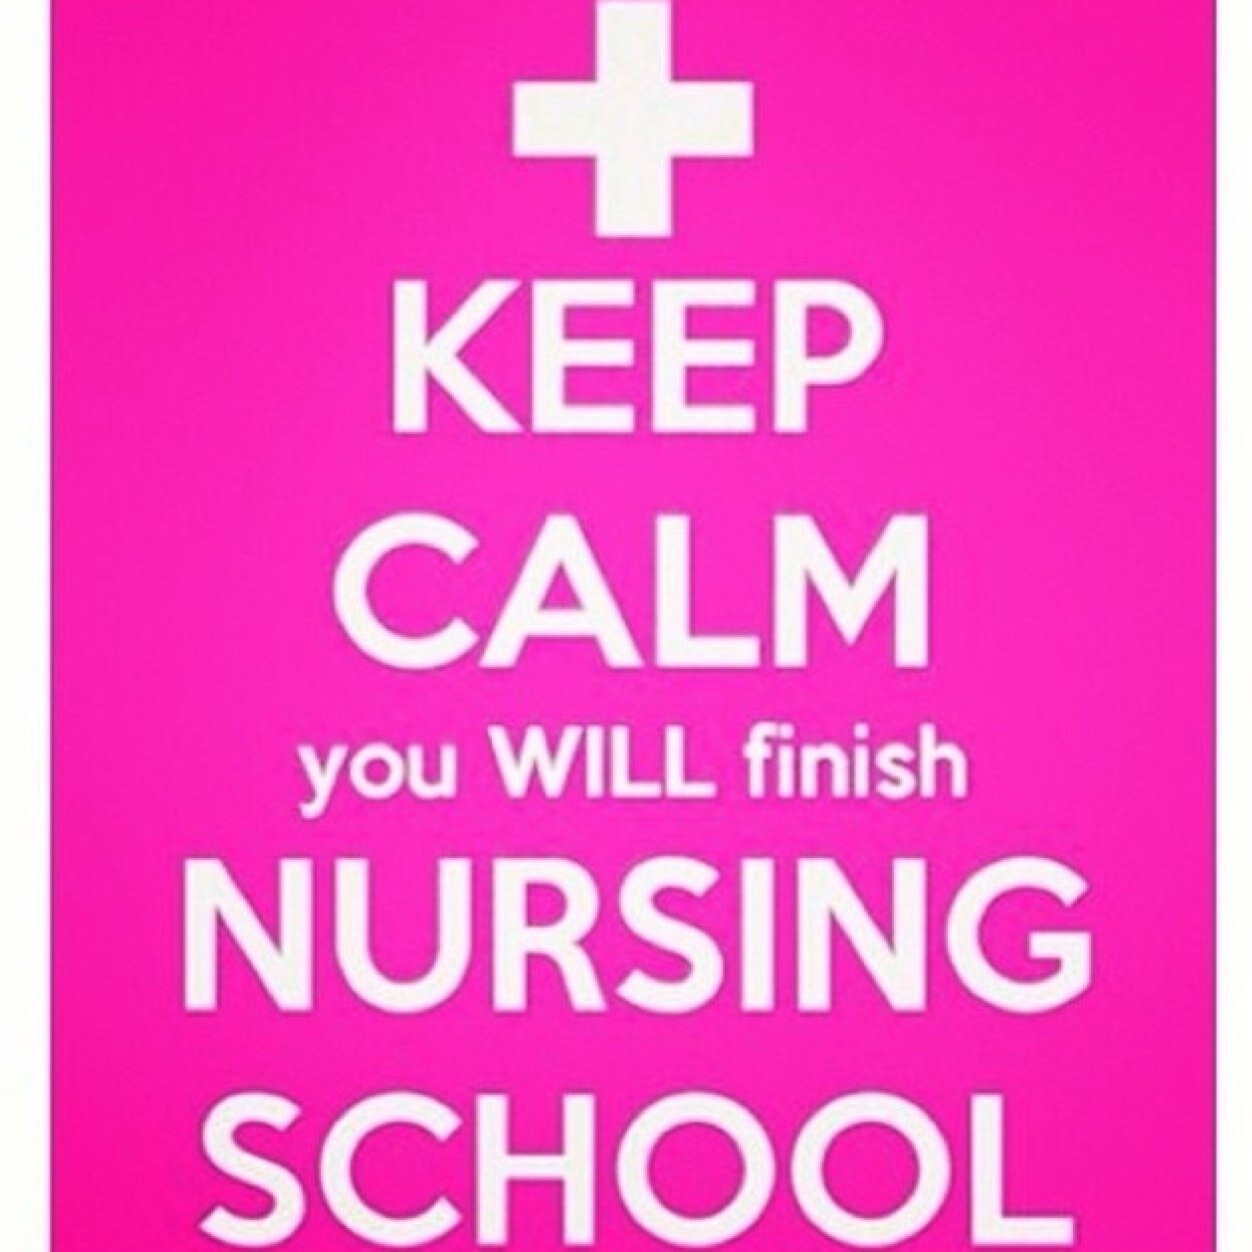 We can all make it through this crazy thing called nursing school!! Keep your chin up and press on :)